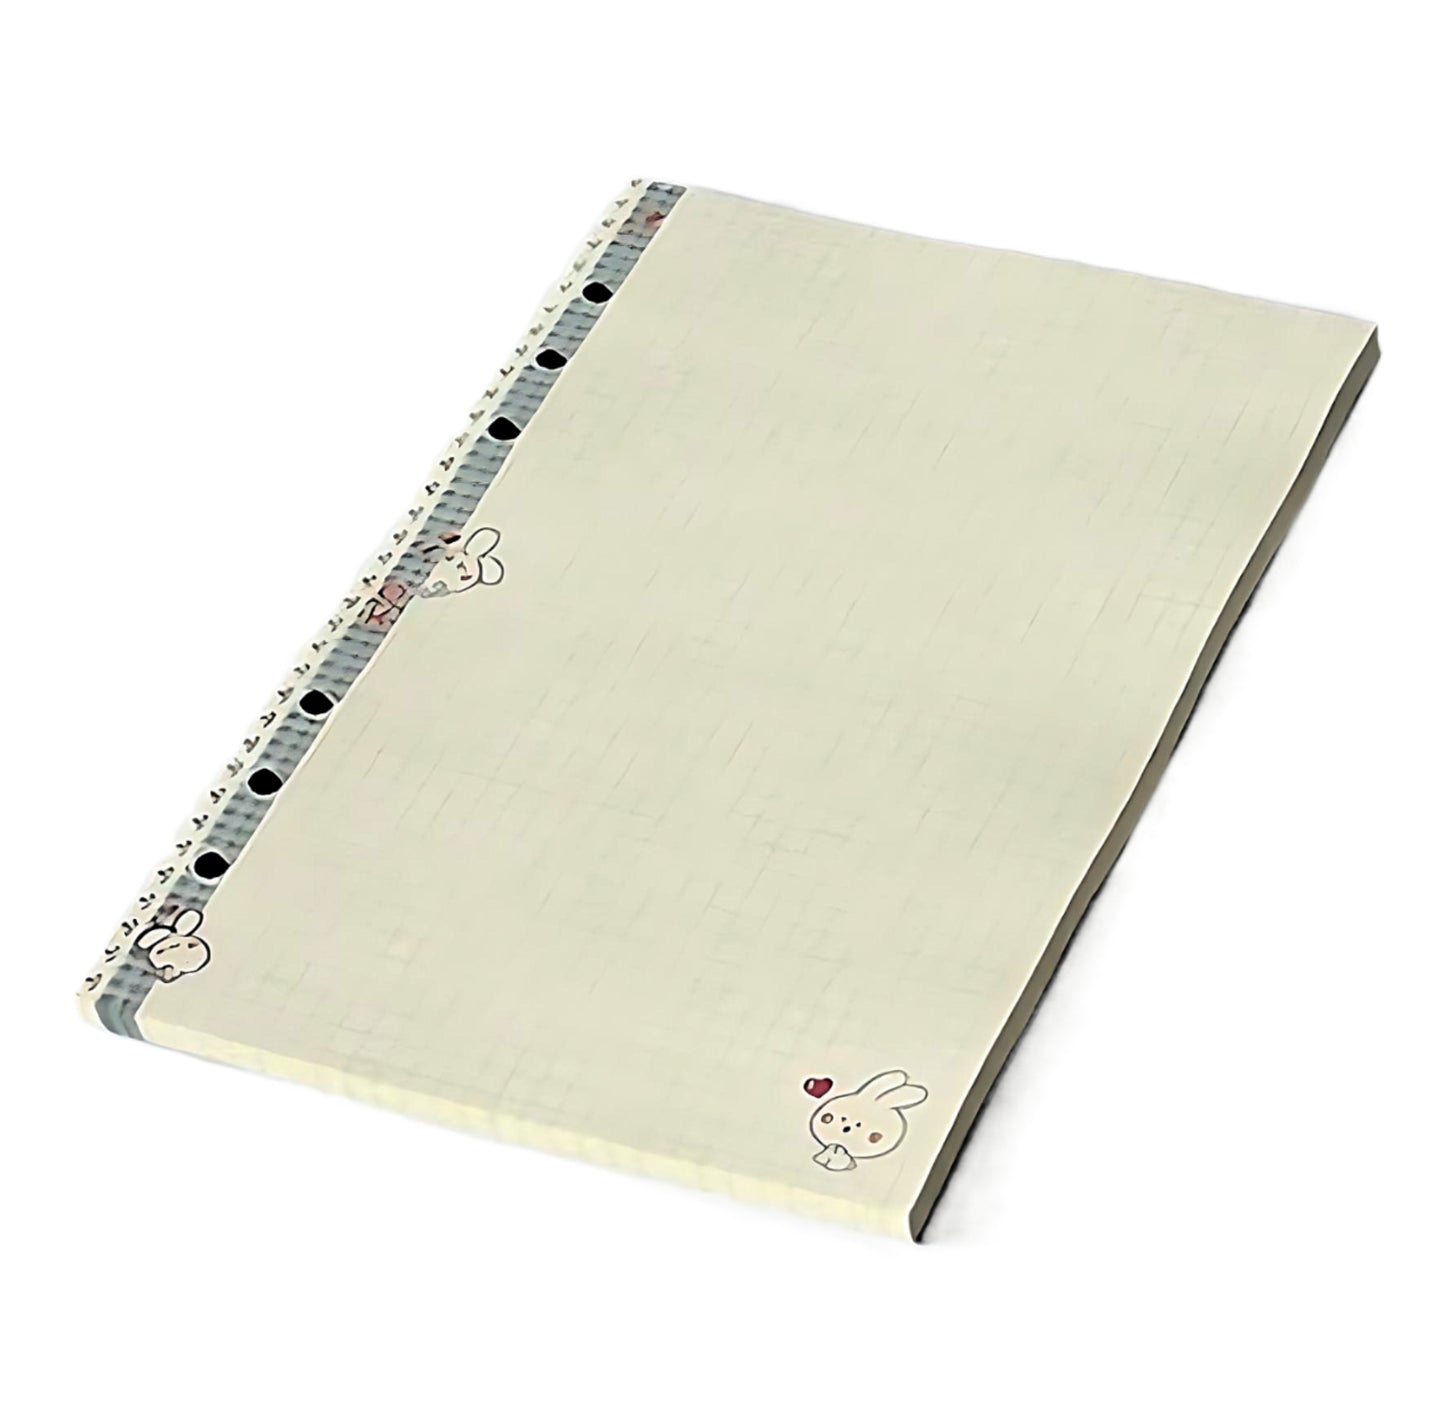 a pack of grid refill paper